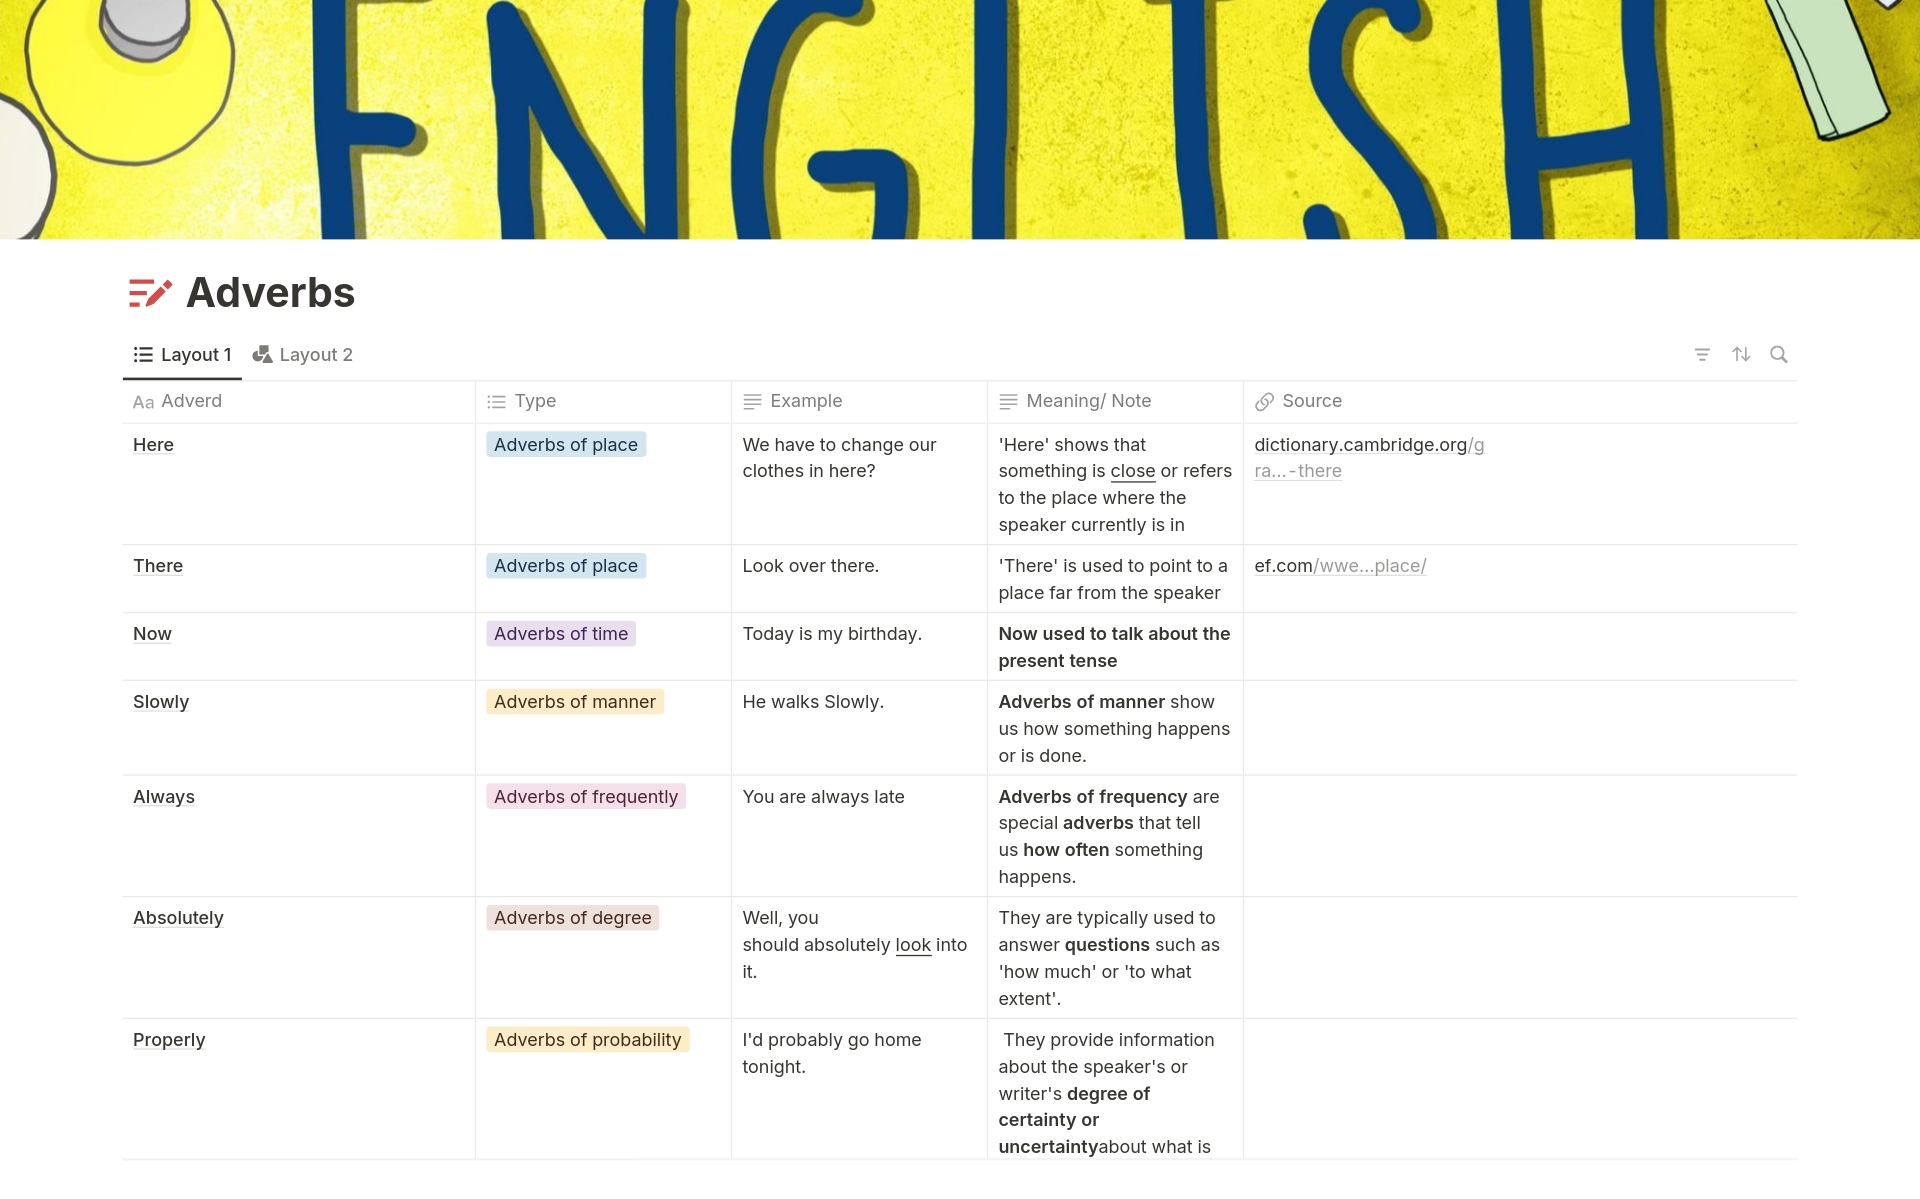 Transform your English language skills with our Notion template, offering streamlined organization for adverbs including type, example, meaning/note, and source columns.






